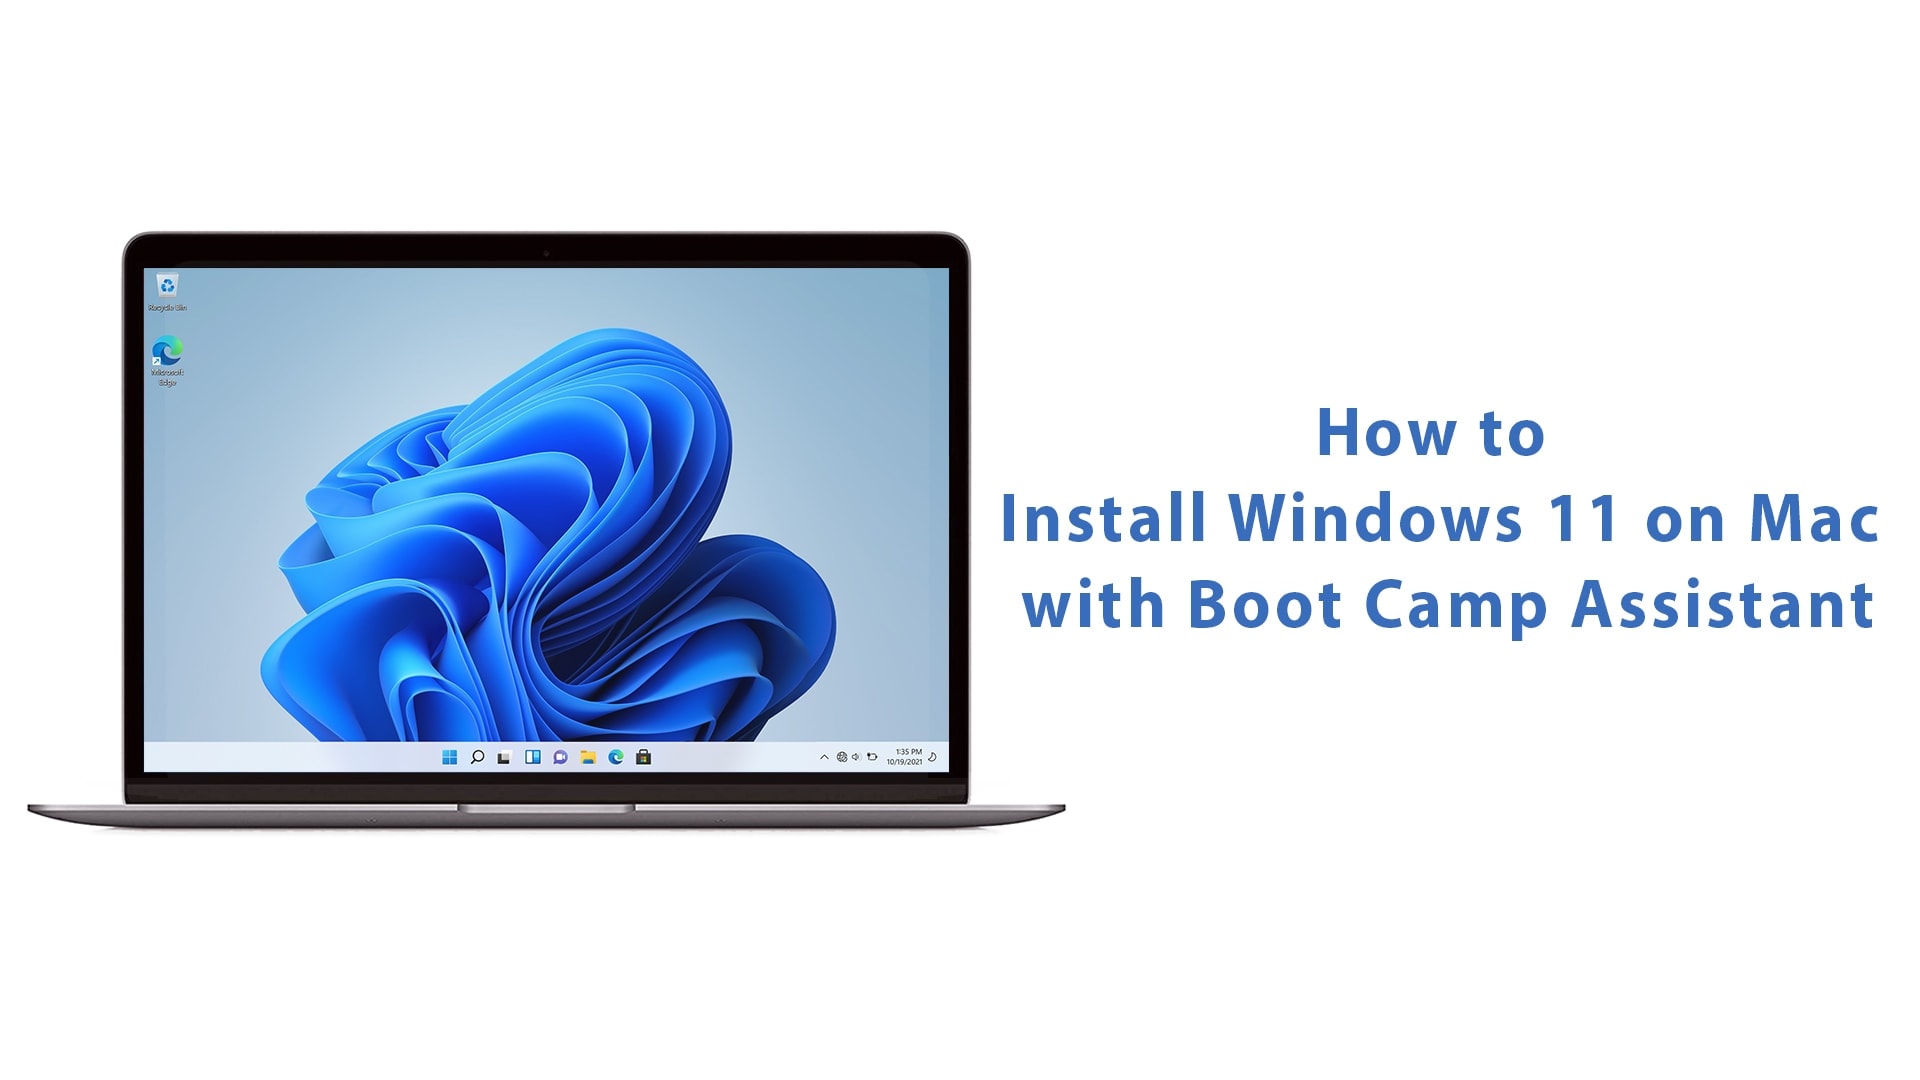 create iso image for boot camp for mac